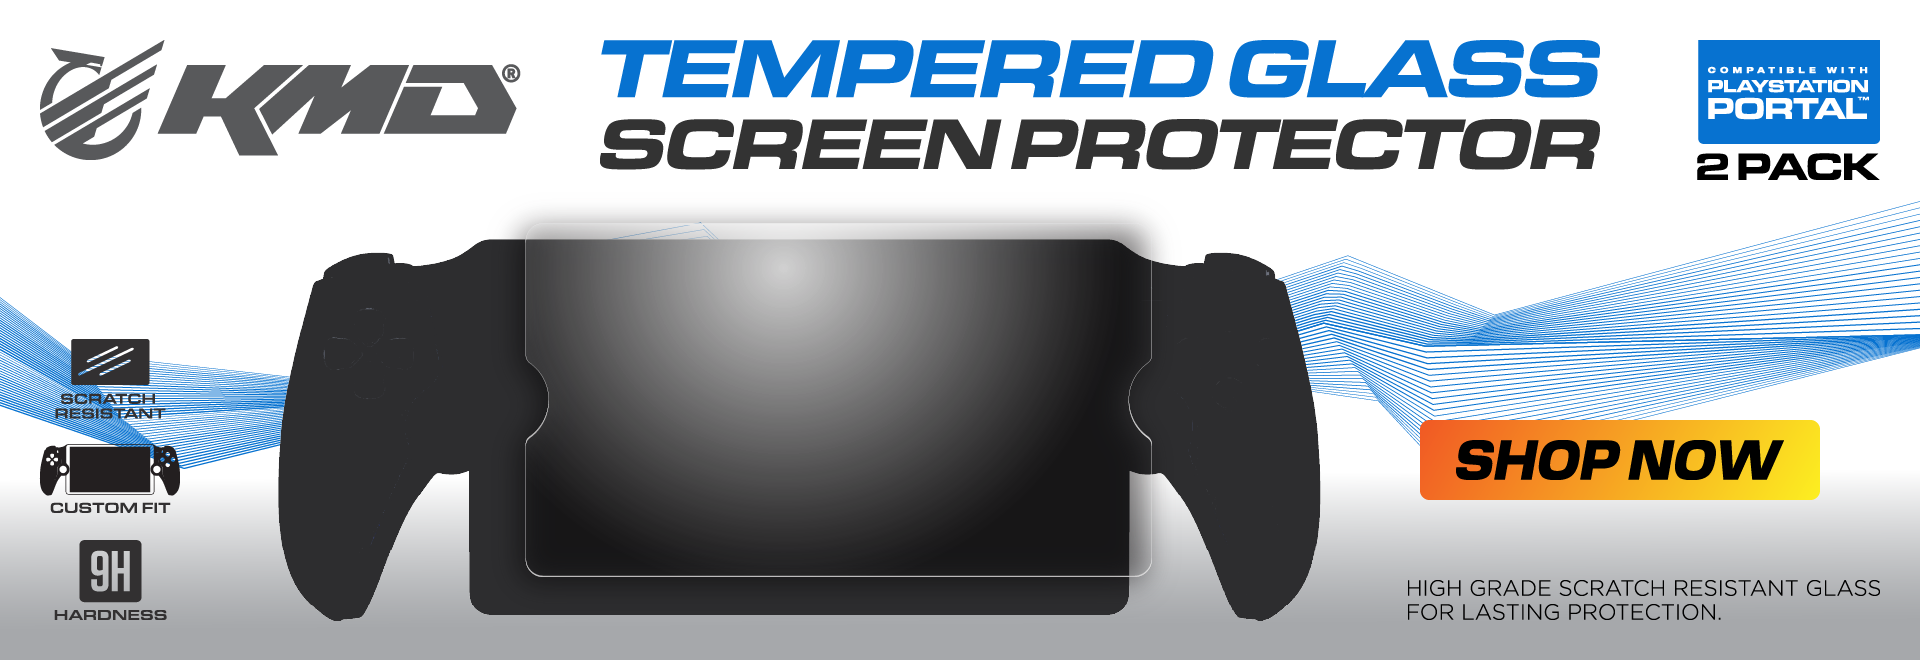 PlayStation Portal Tempered Glass by KMD - Shop now!